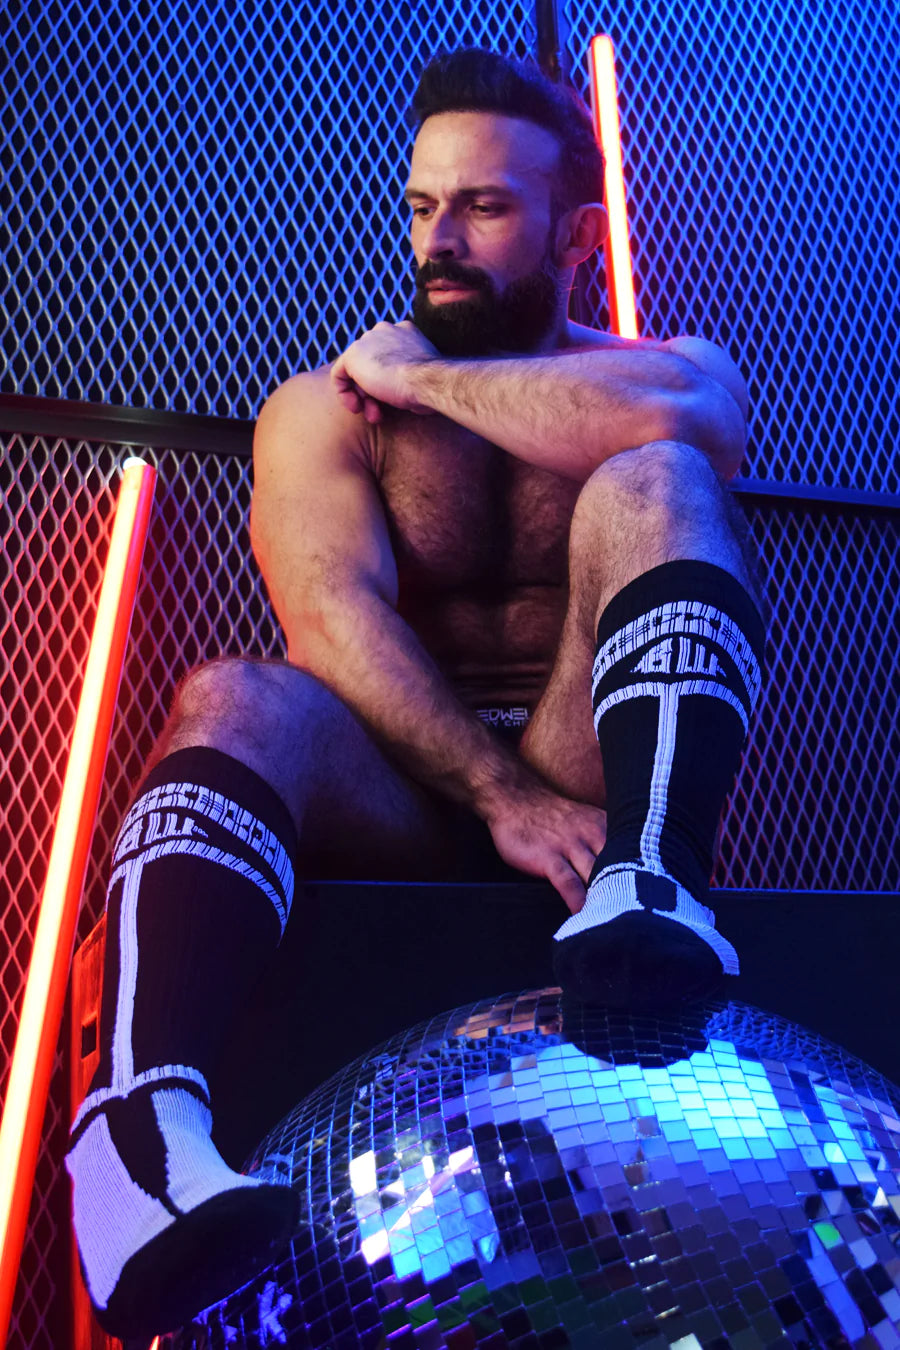 A scantily clad masculine model sits on a black box against a metal fence with neon lights. His feet sport black Hybred Socks and rest on a disco ball.